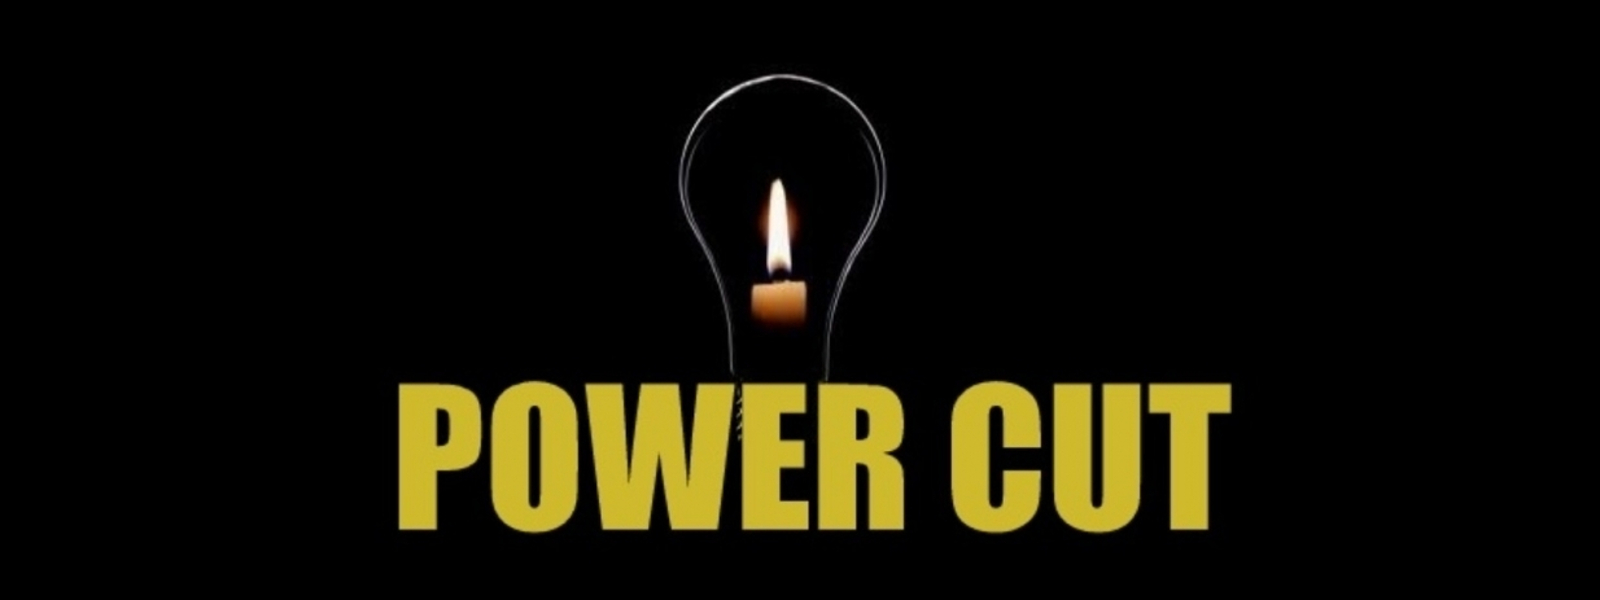 Power cuts for 20th & 21st September